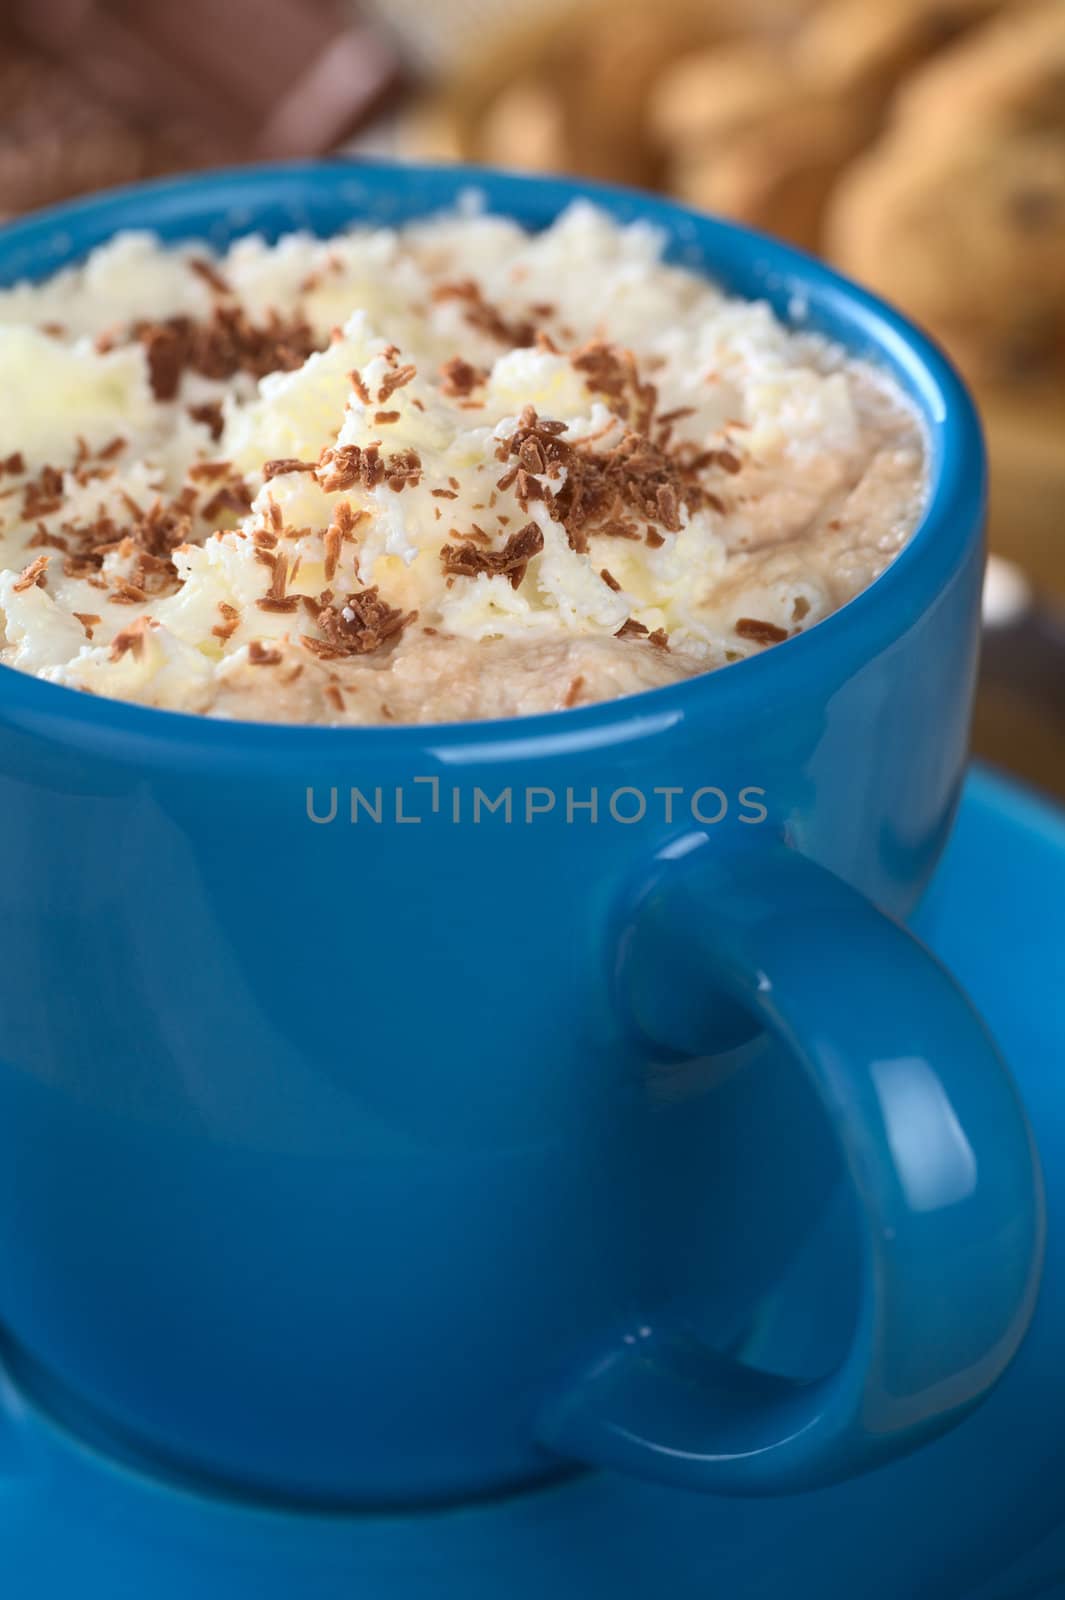 Hot Chocolate with Whipped Cream by ildi